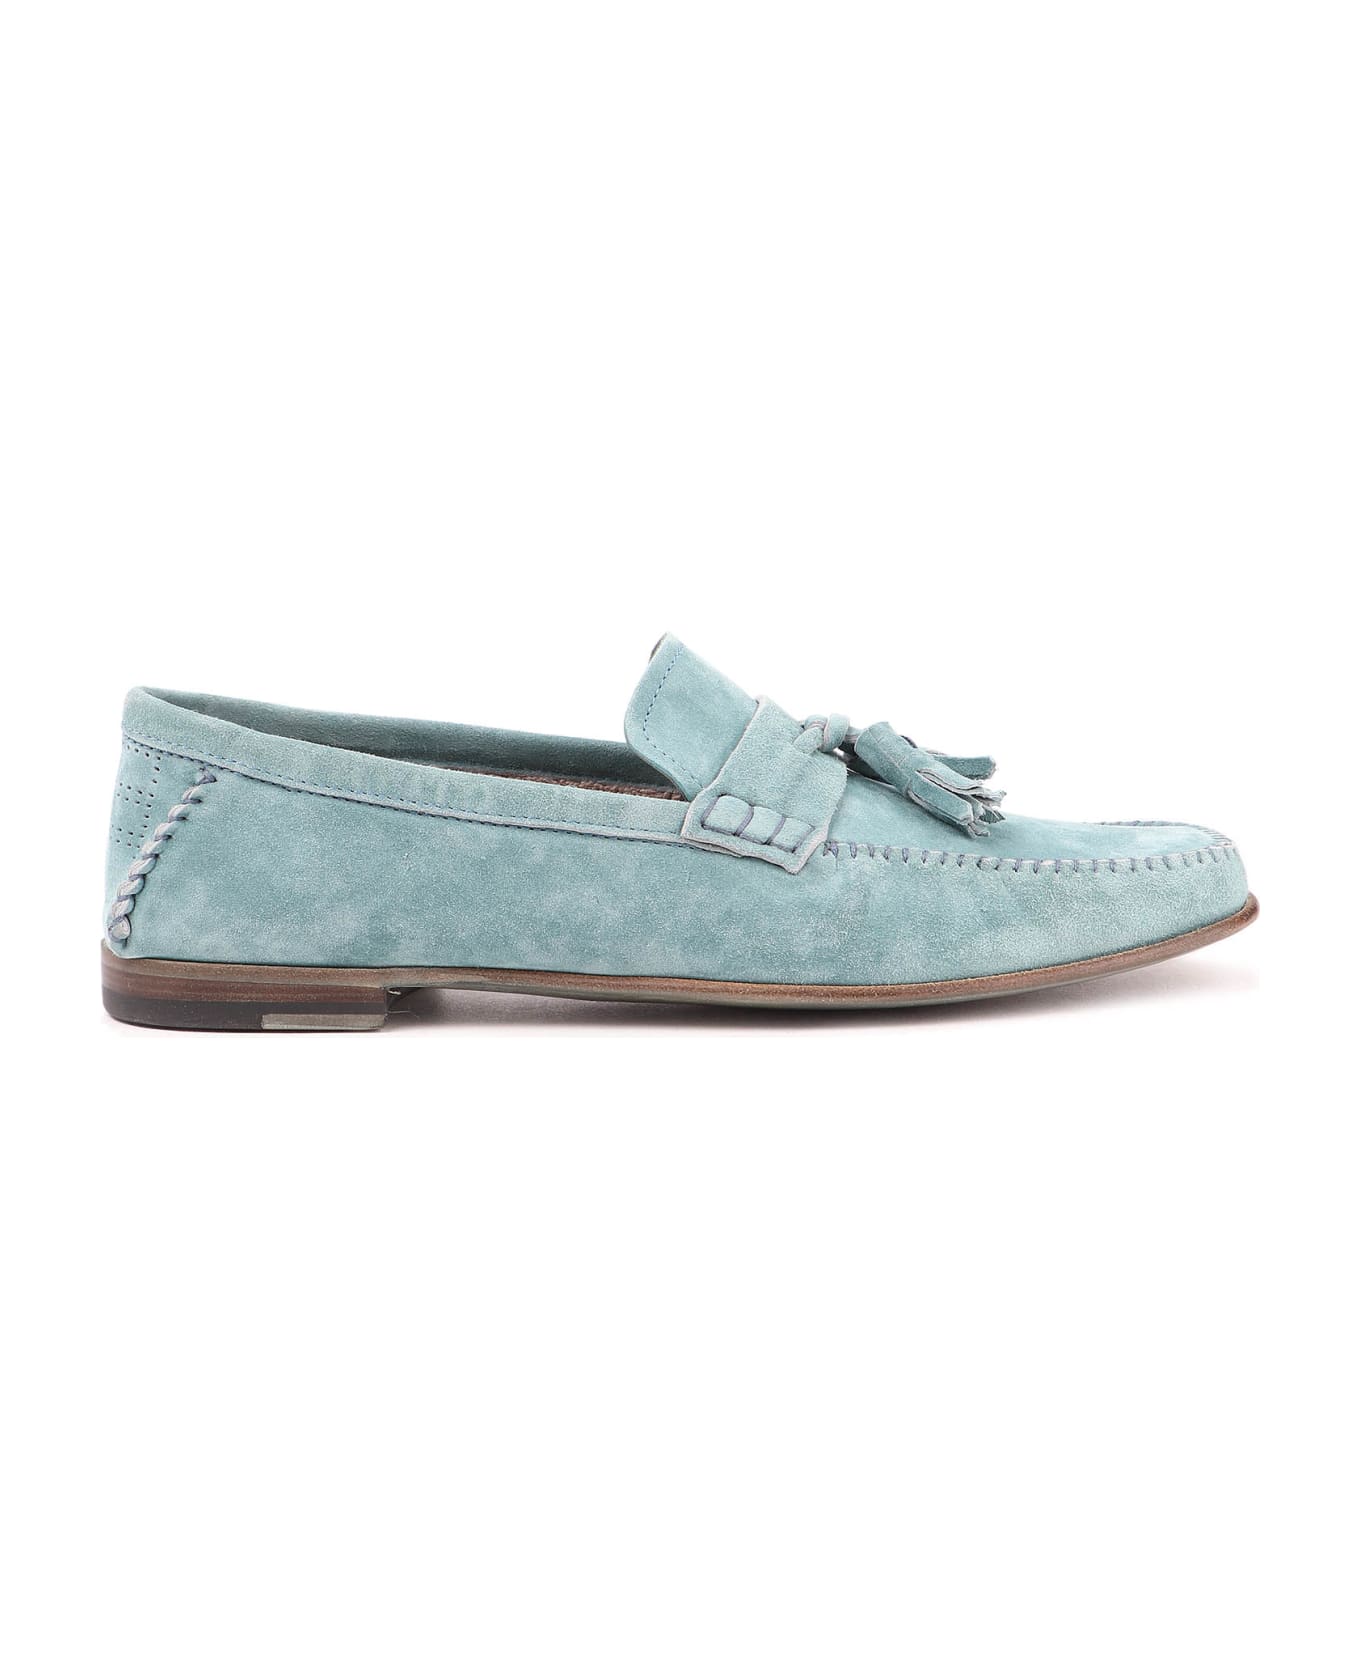 Fratelli Rossetti Yacht Shoes | italist